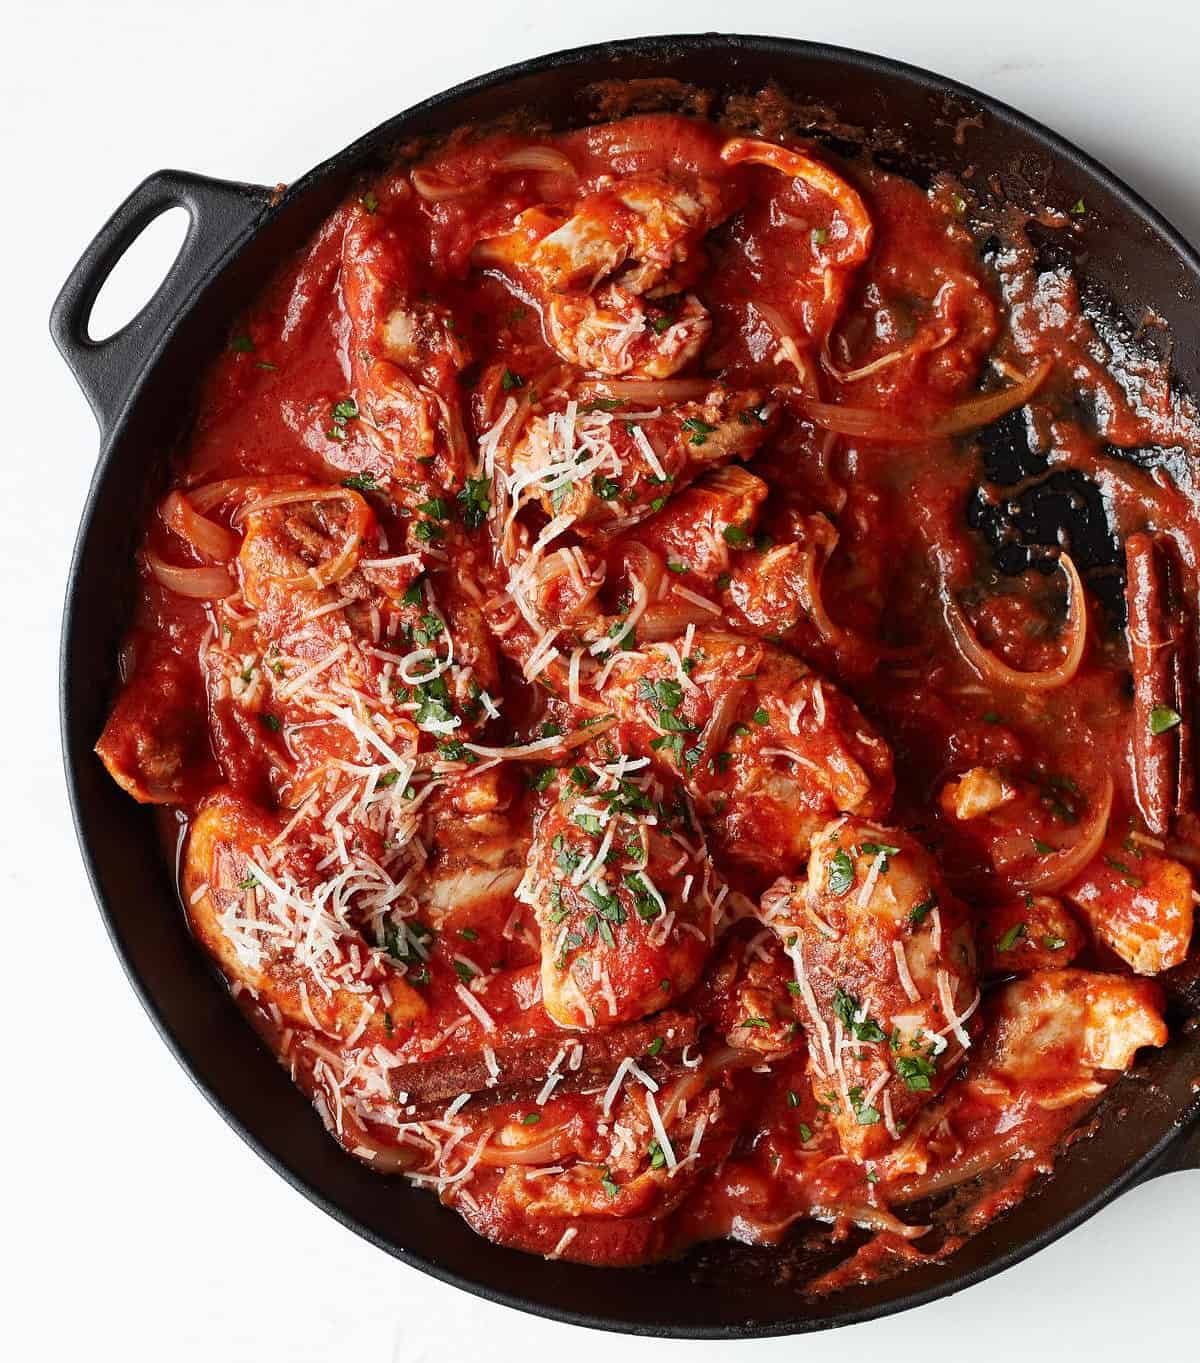  Not your typical pasta dish - try out this Greek-inspired Chicken Kapama recipe.